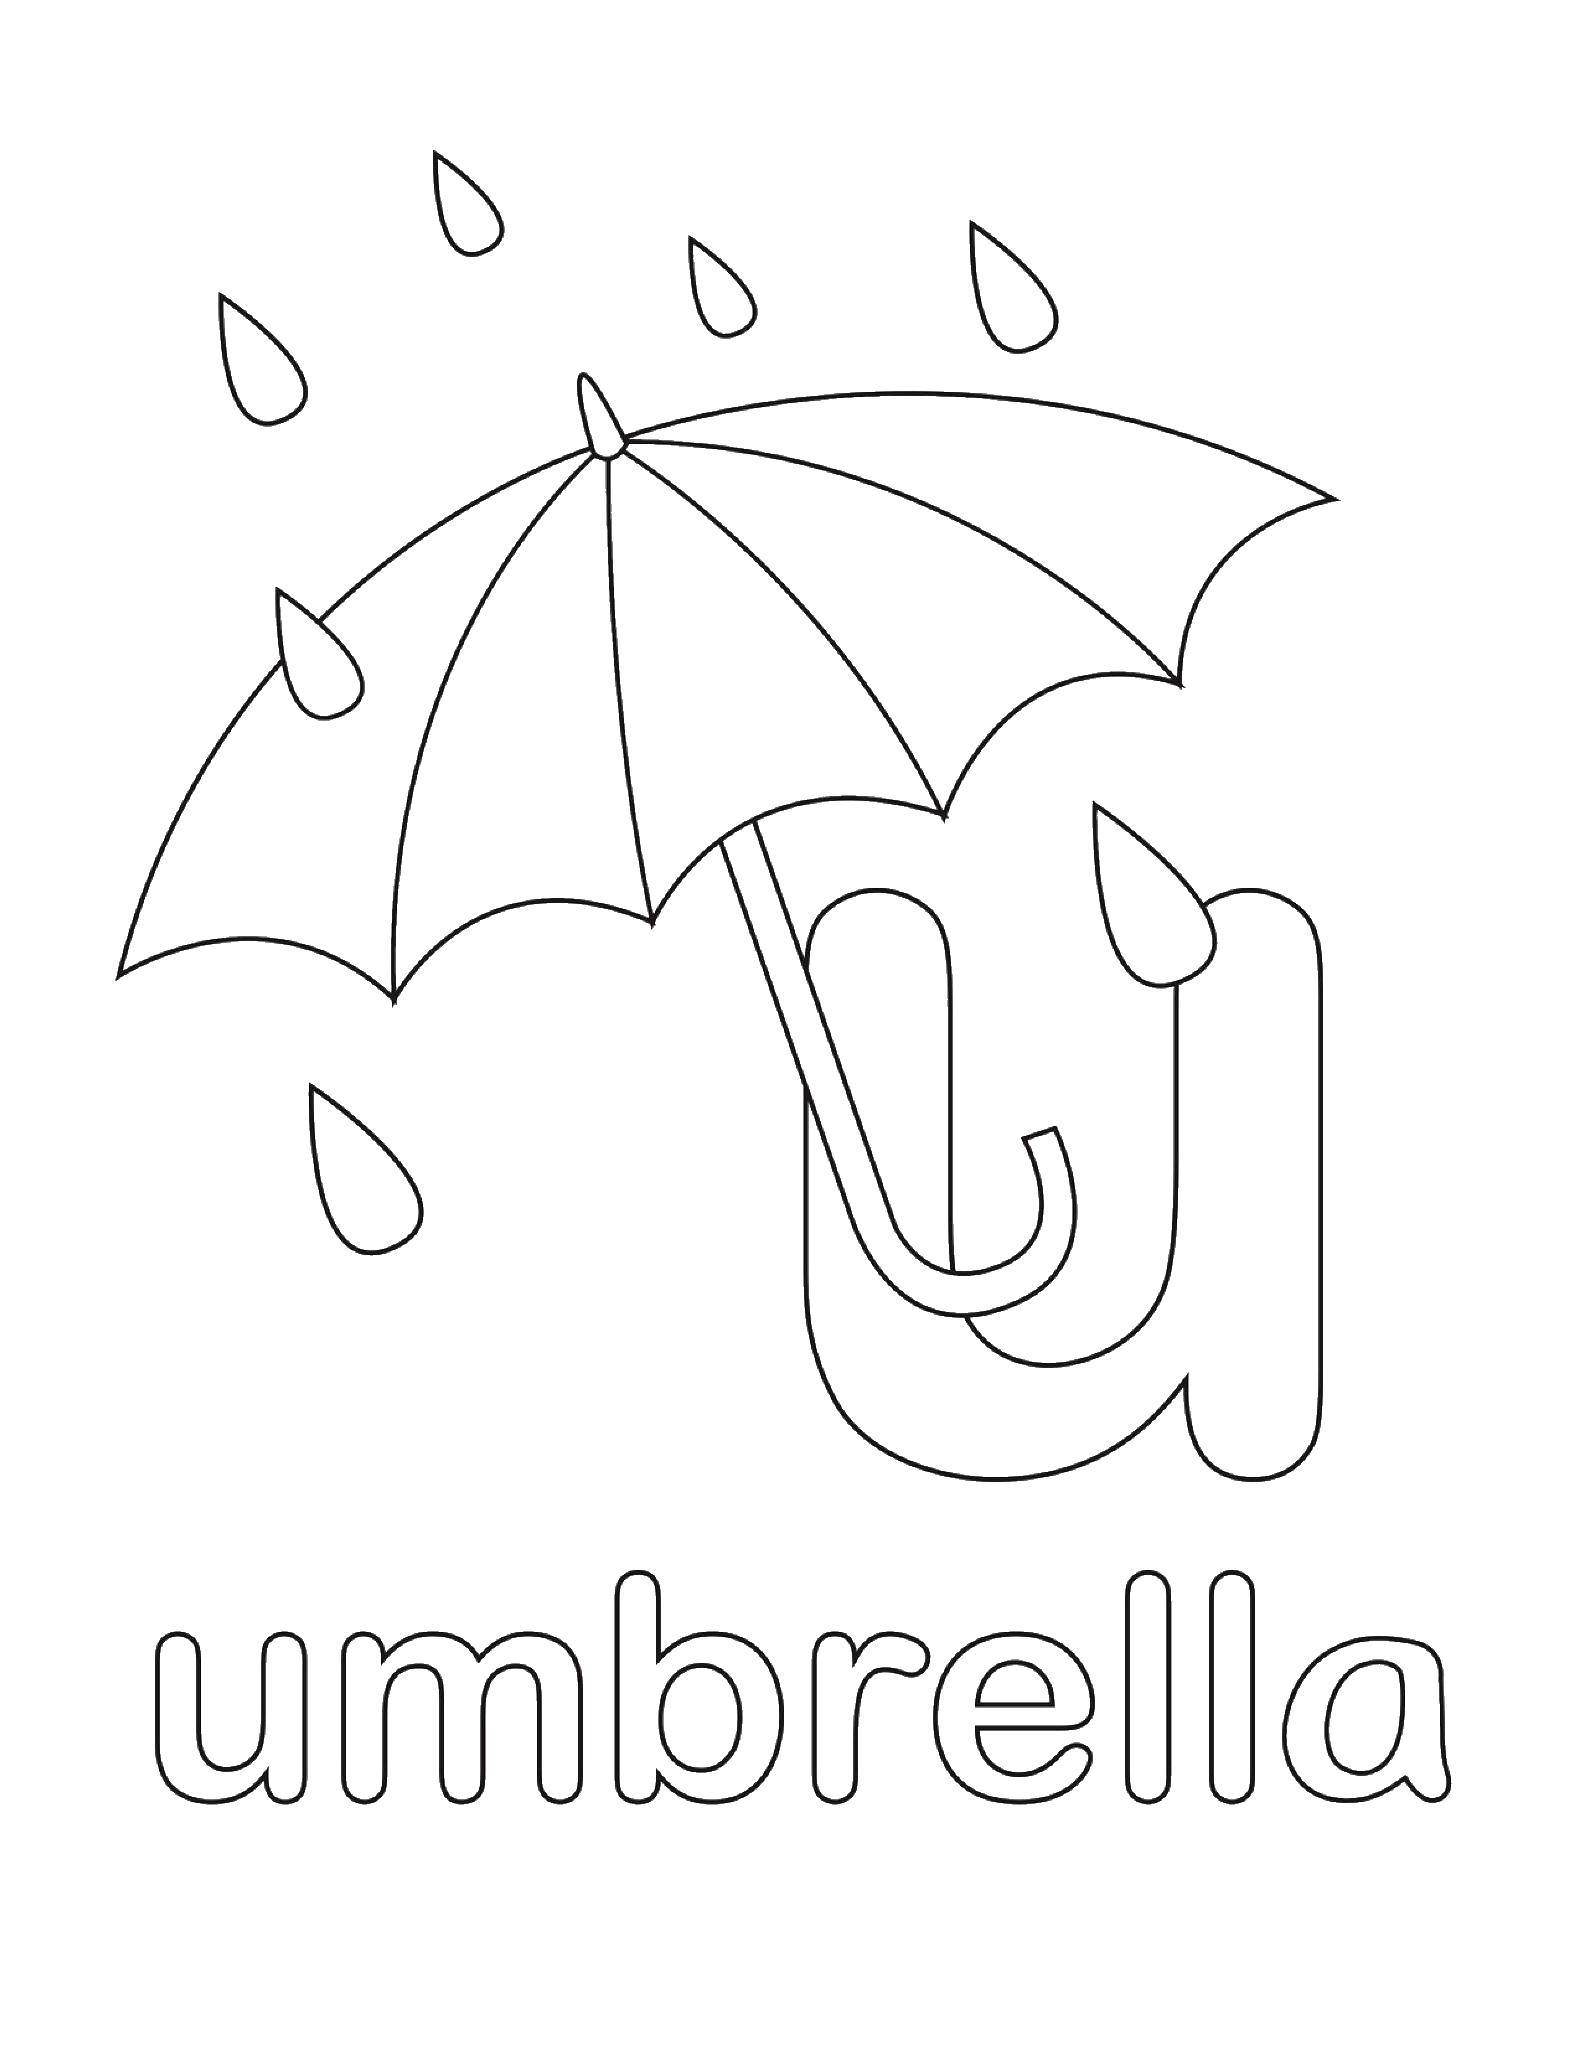 Coloring Z umbrella. Category English words. Tags:  English.